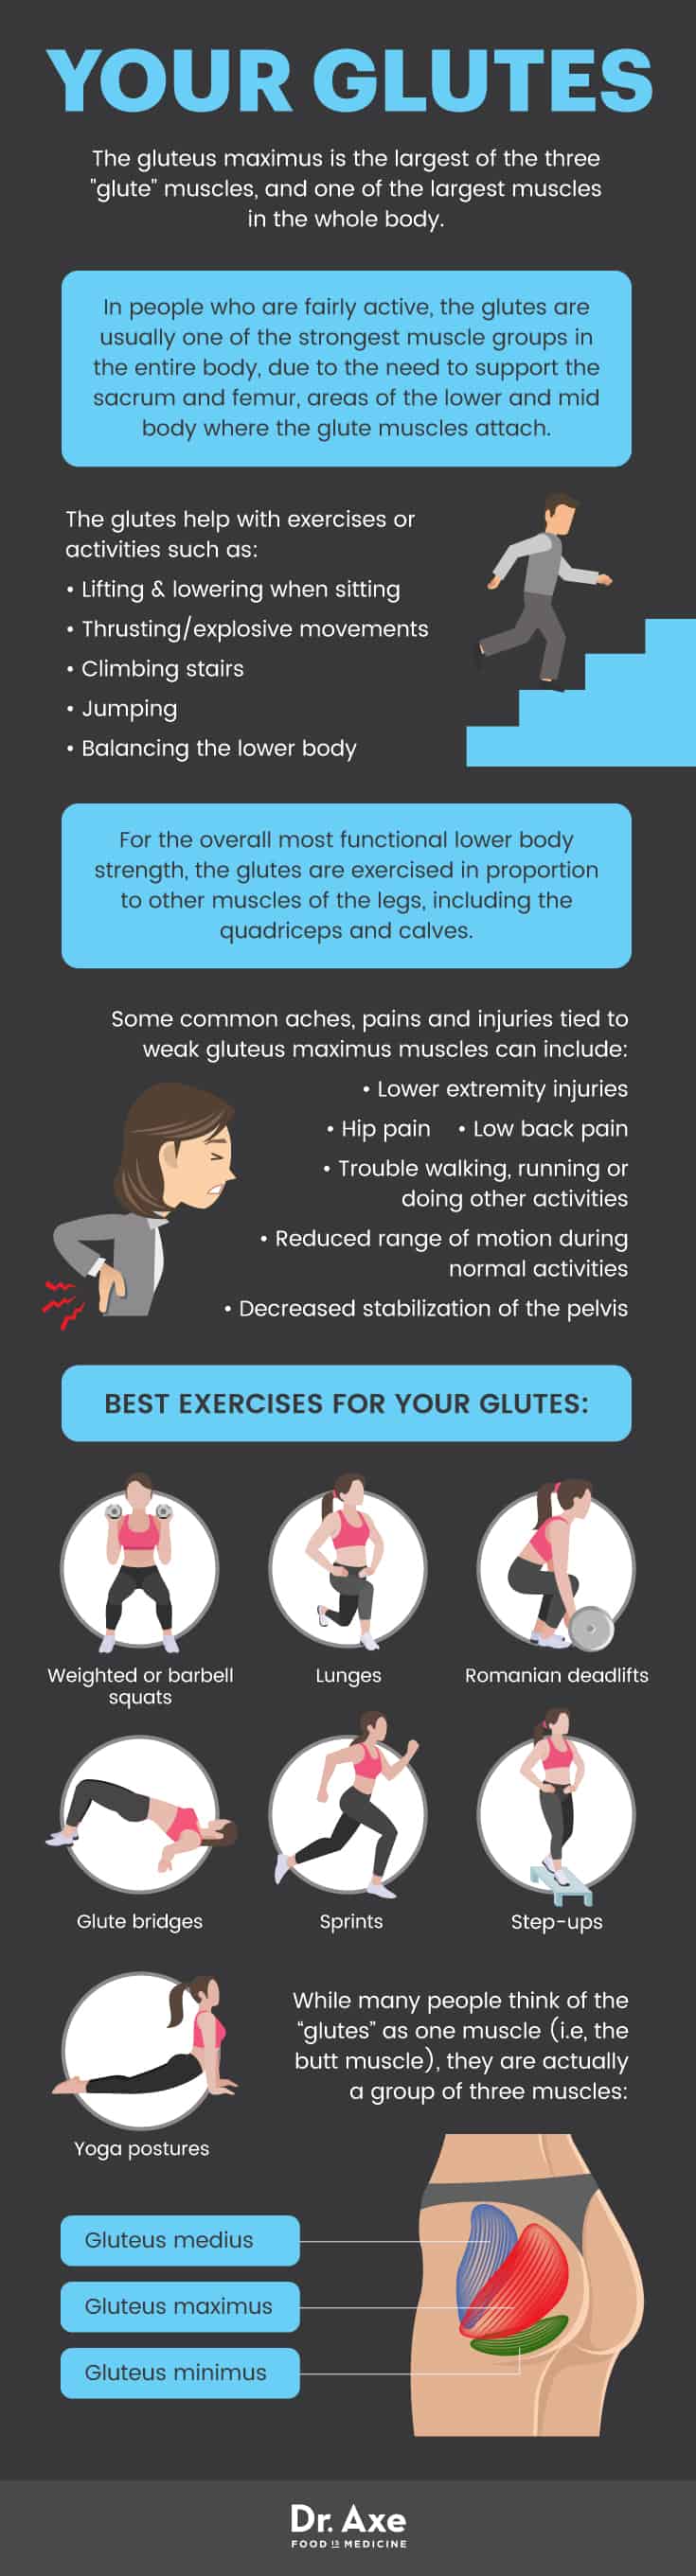 Glutes guide - Dr. Axe